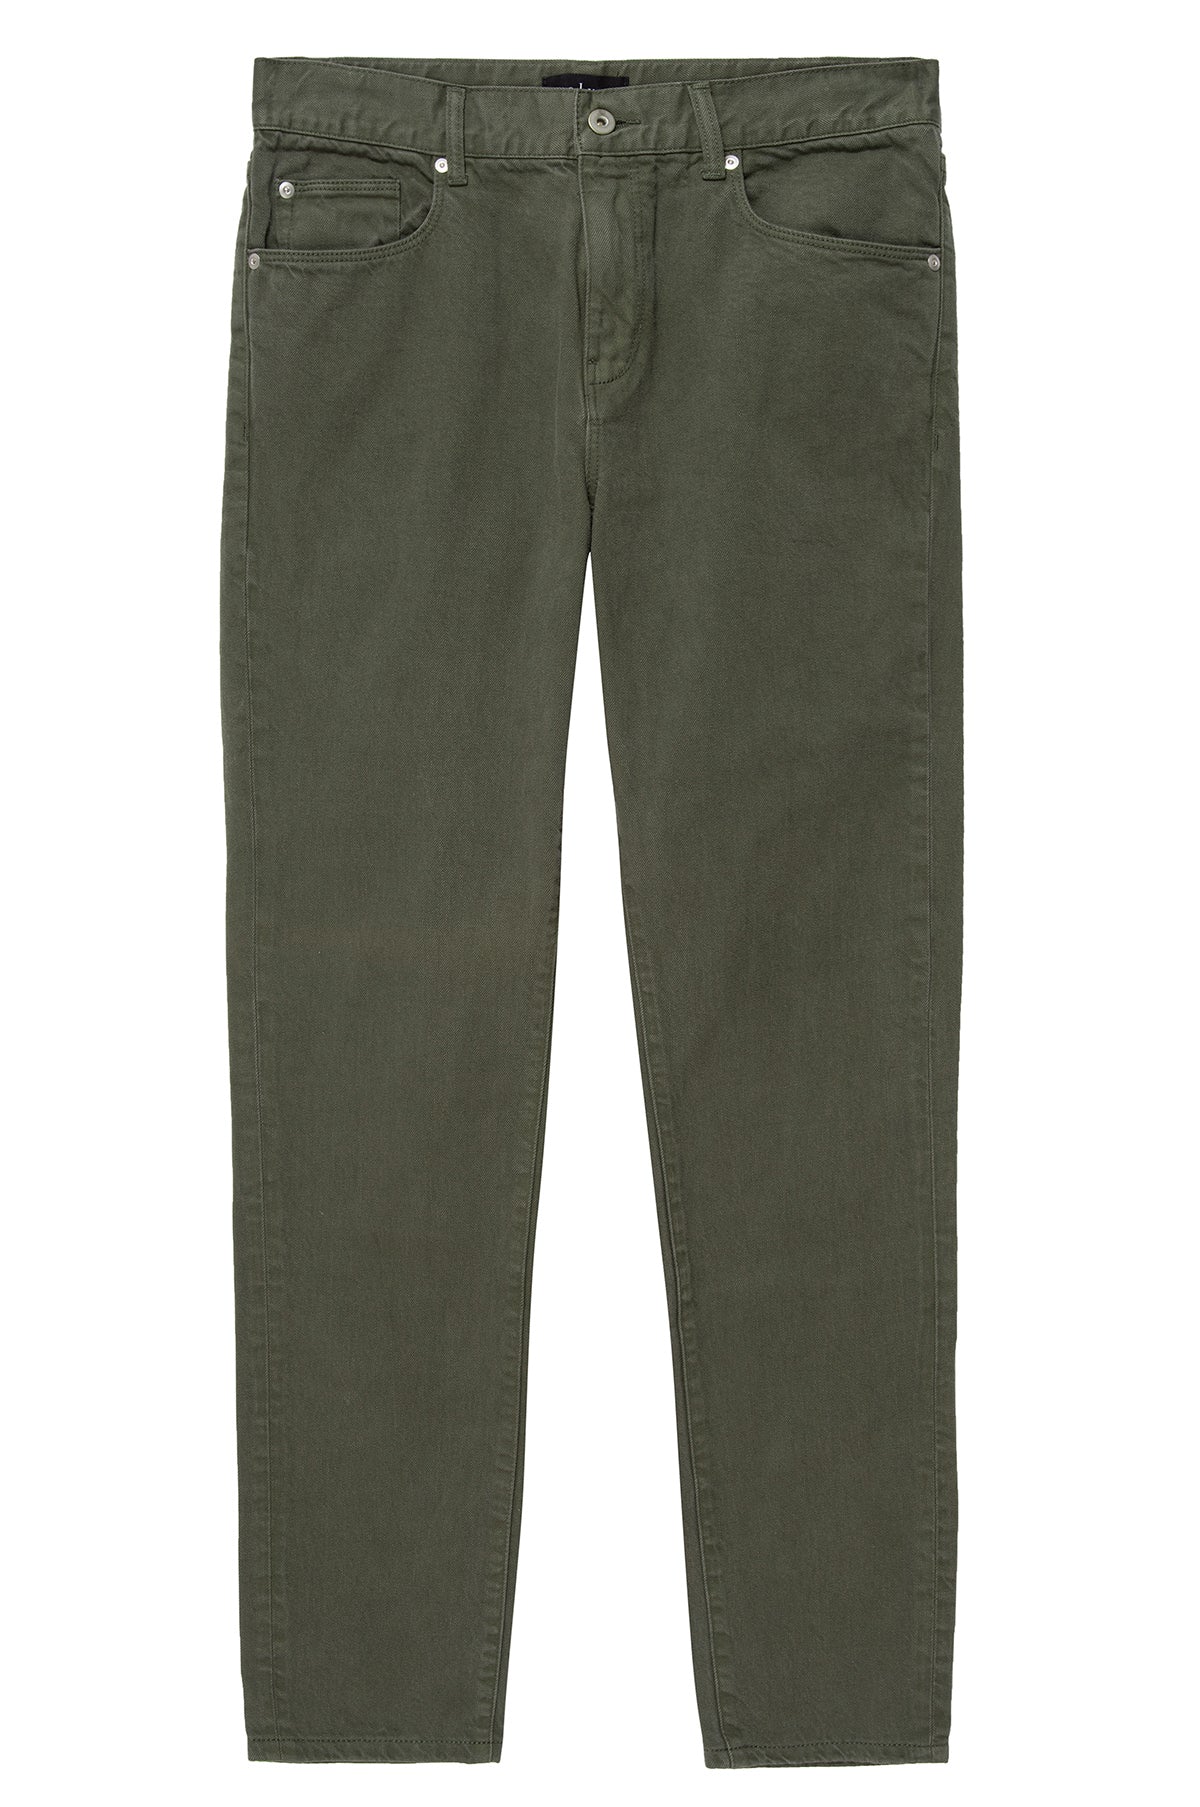   A pair of men's JOSEPH COTTON CANVAS PANT pants by Velvet by Graham & Spencer in olive green. 